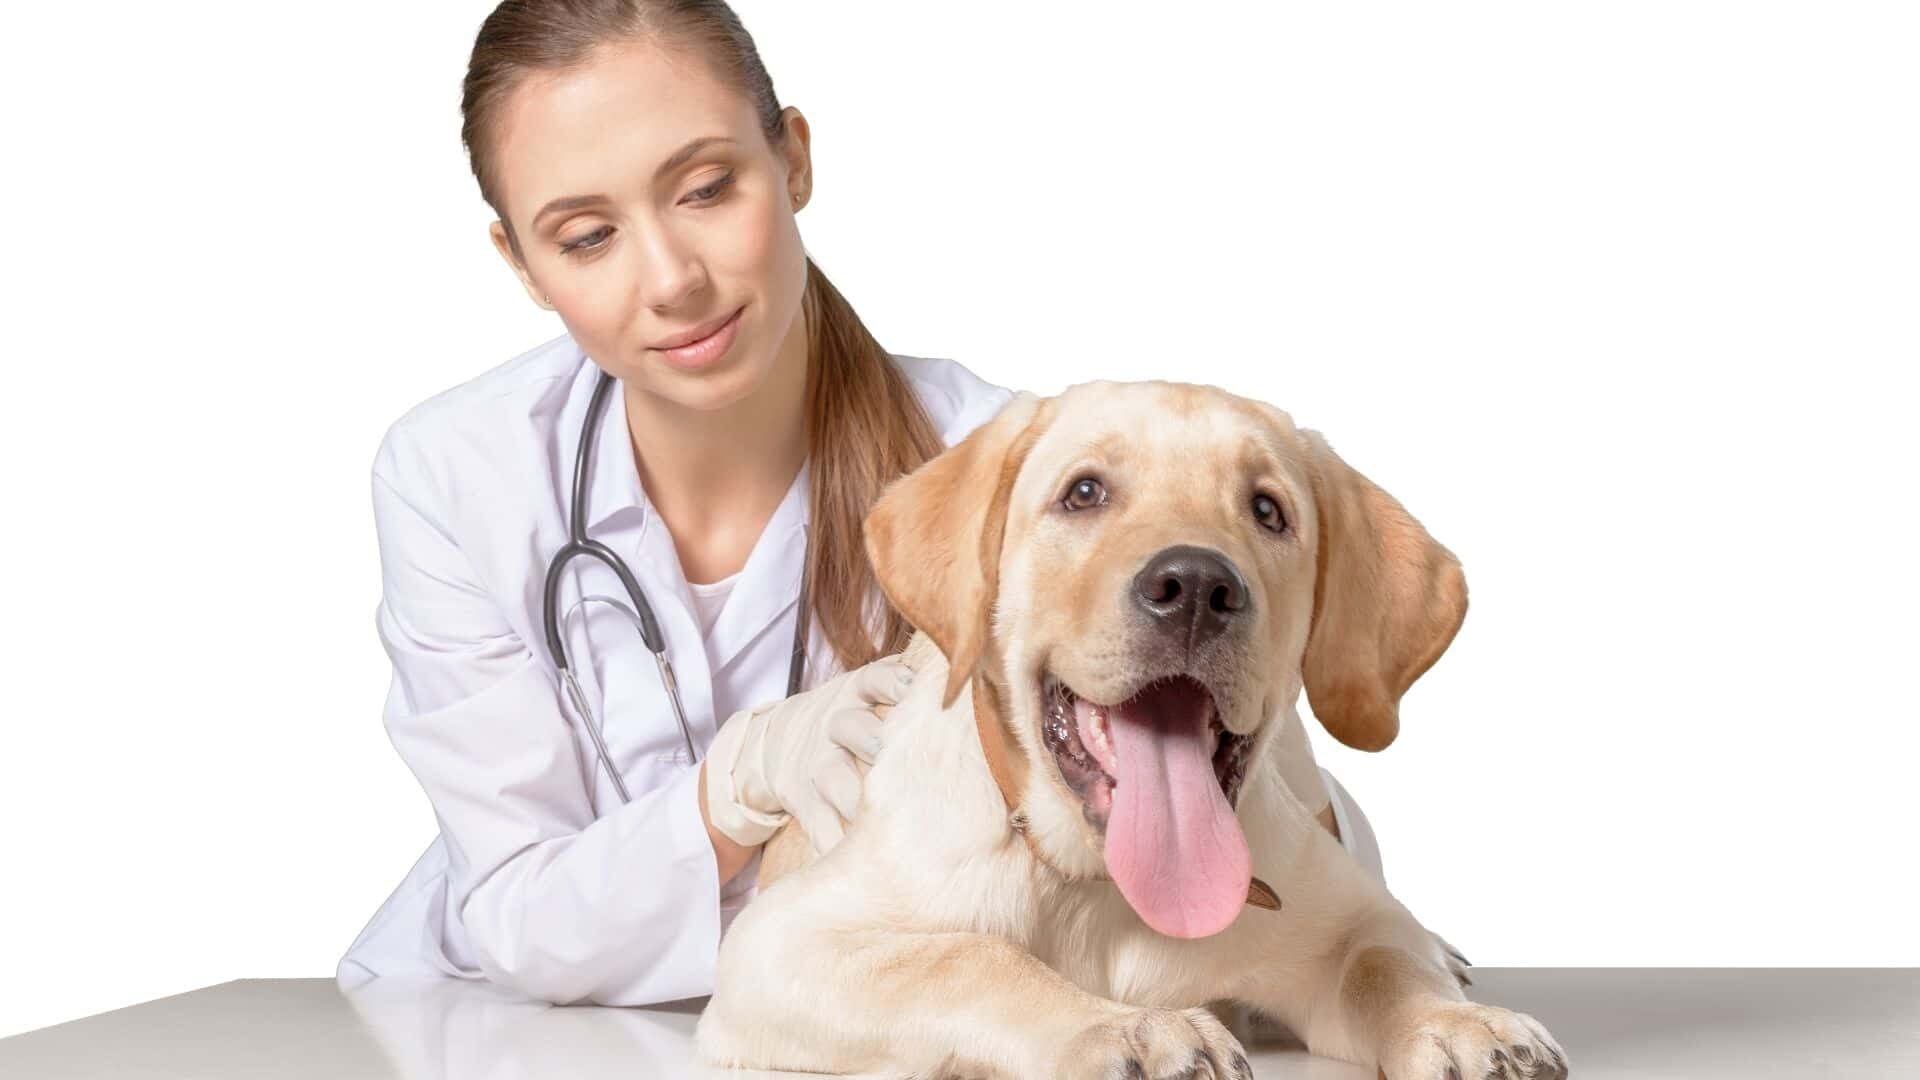 When to take your vomiting dog to vet?